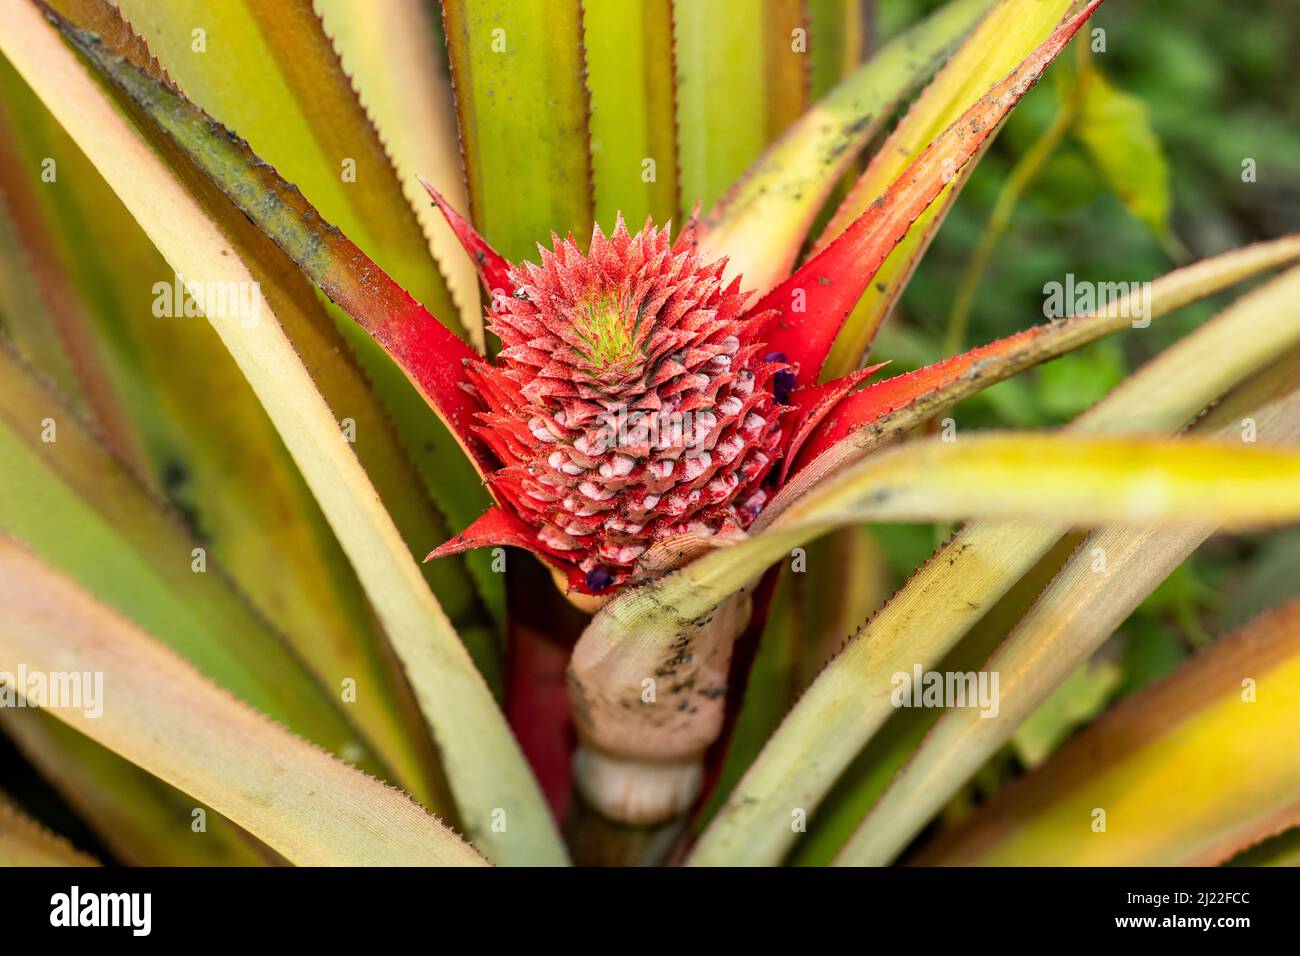 Pineapple or Ananas comosus are a juicy fragrant and delicious tropical fruit. Pineapple fruit is actually a complex flower head that forms around the s Stock Photo